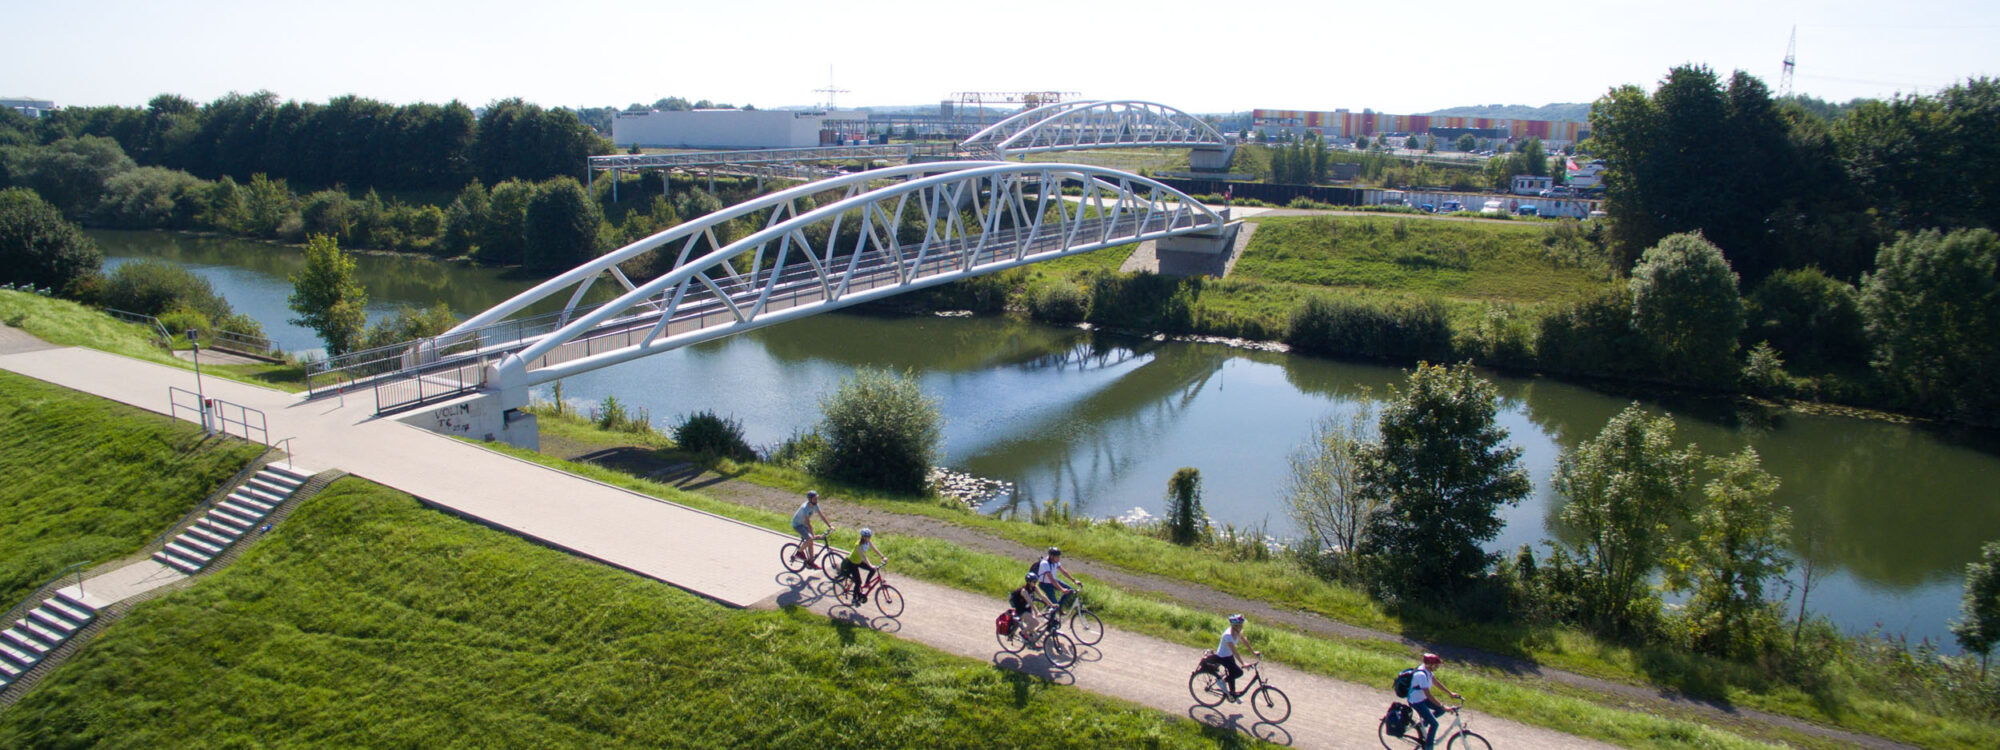 The photo shows cyclists on the cycle path on the Datteln-Hamm Canal in Hamm